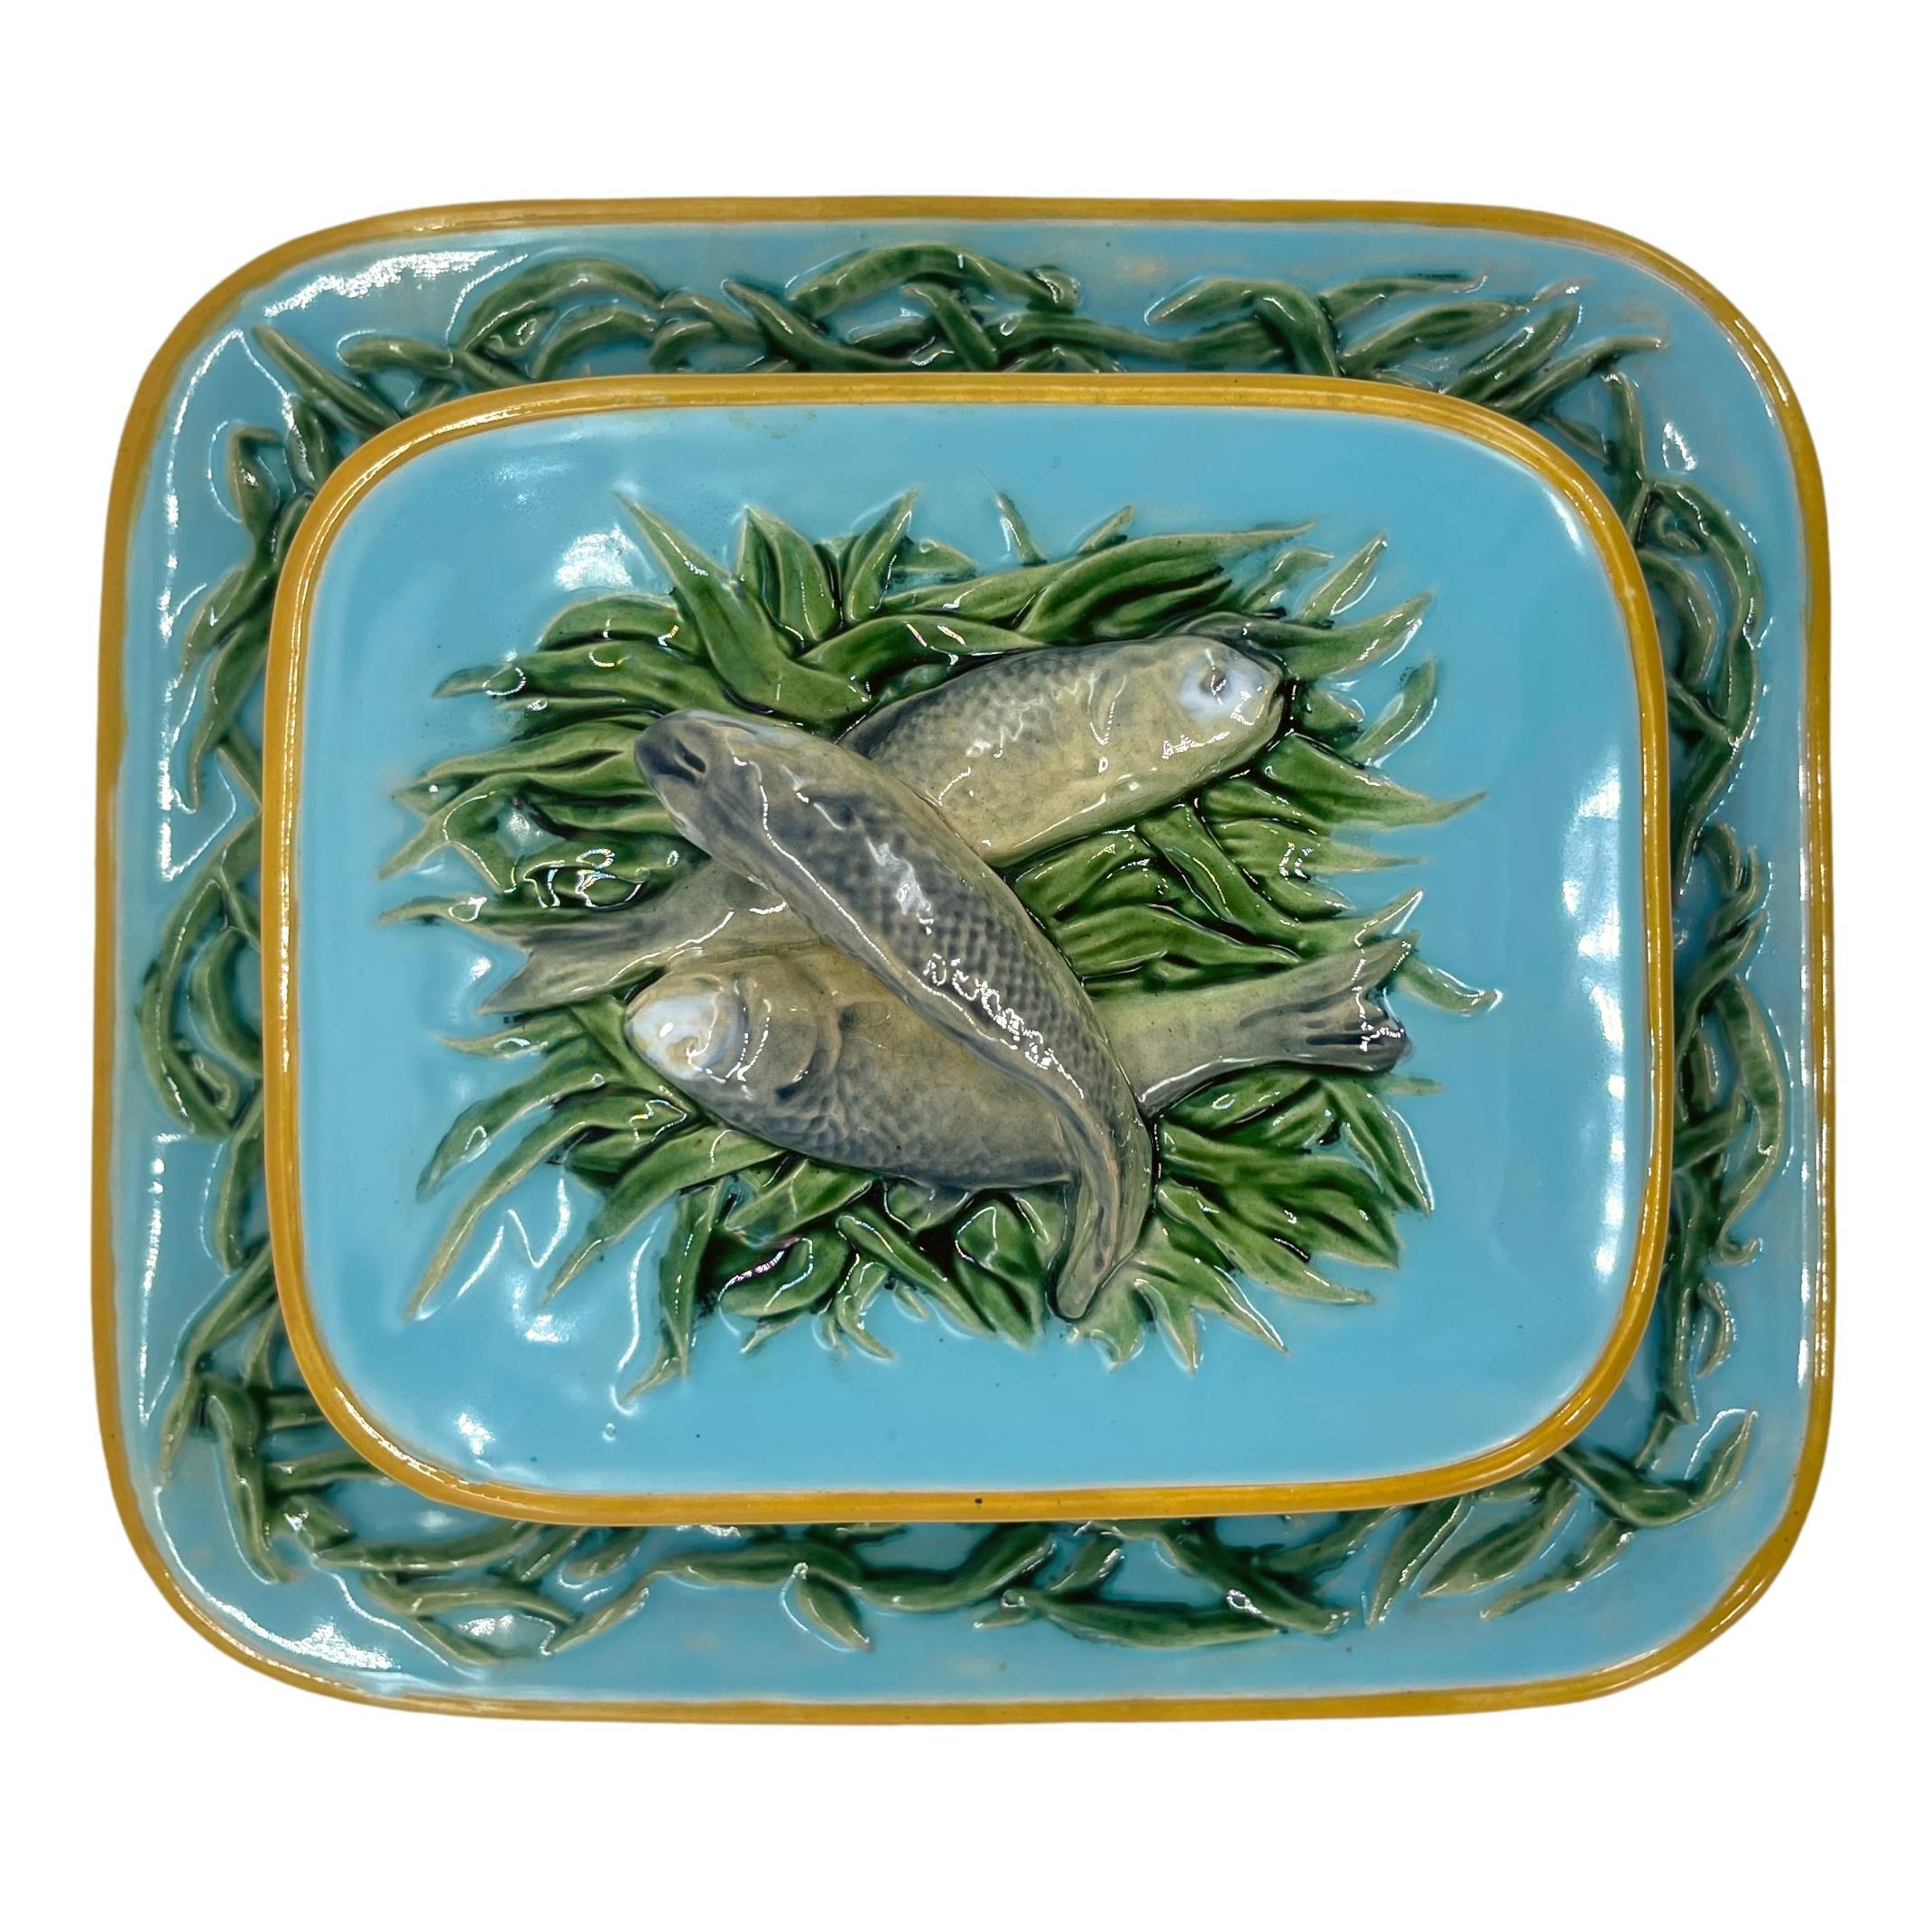 Minton Majolica Sardine Server, the box with integral stand banded with green-glazed seaweed, the lid with three naturalistically glazed sardines on a bed of seaweed, the reverse with impressed marks: 'MINTONS,' with date cypher for 1876, and design